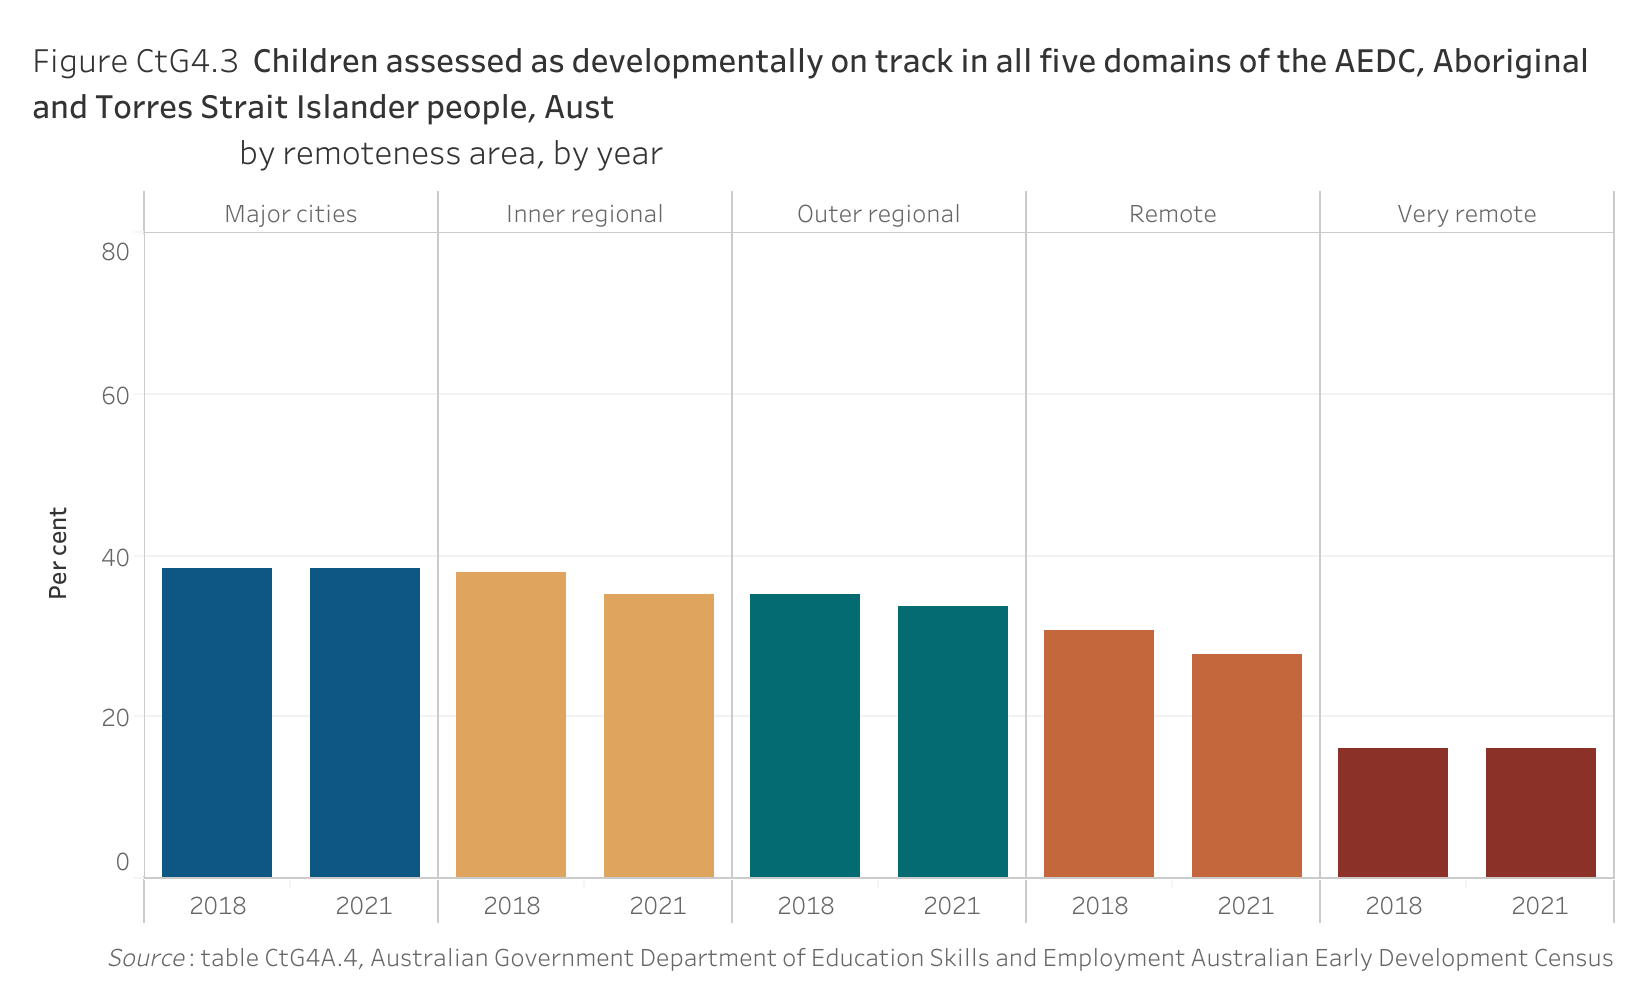 Figure CtG4.3 shows children assessed as developmentally on track in all five domains of the Australian Early Development Census, Aboriginal and Torres Strait Islander people, Australia, by remoteness area, by year. More details can be found within the text near this image.